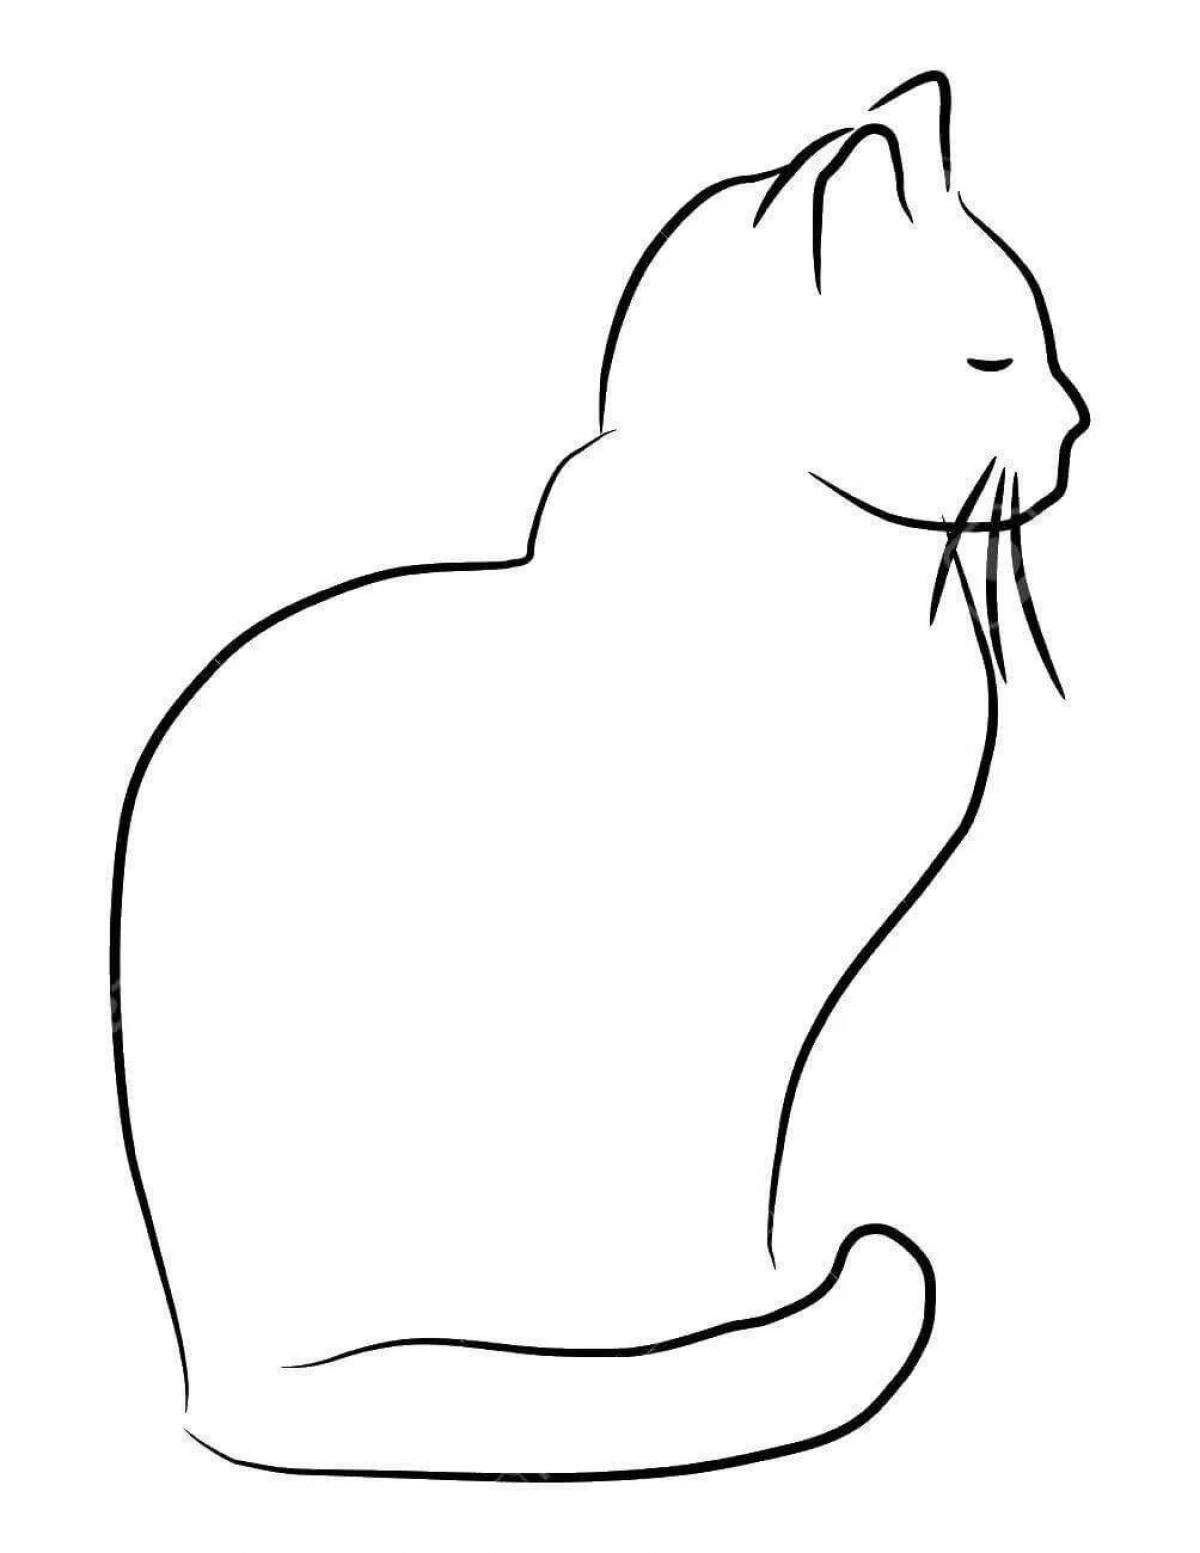 Attractive sitting cat coloring page